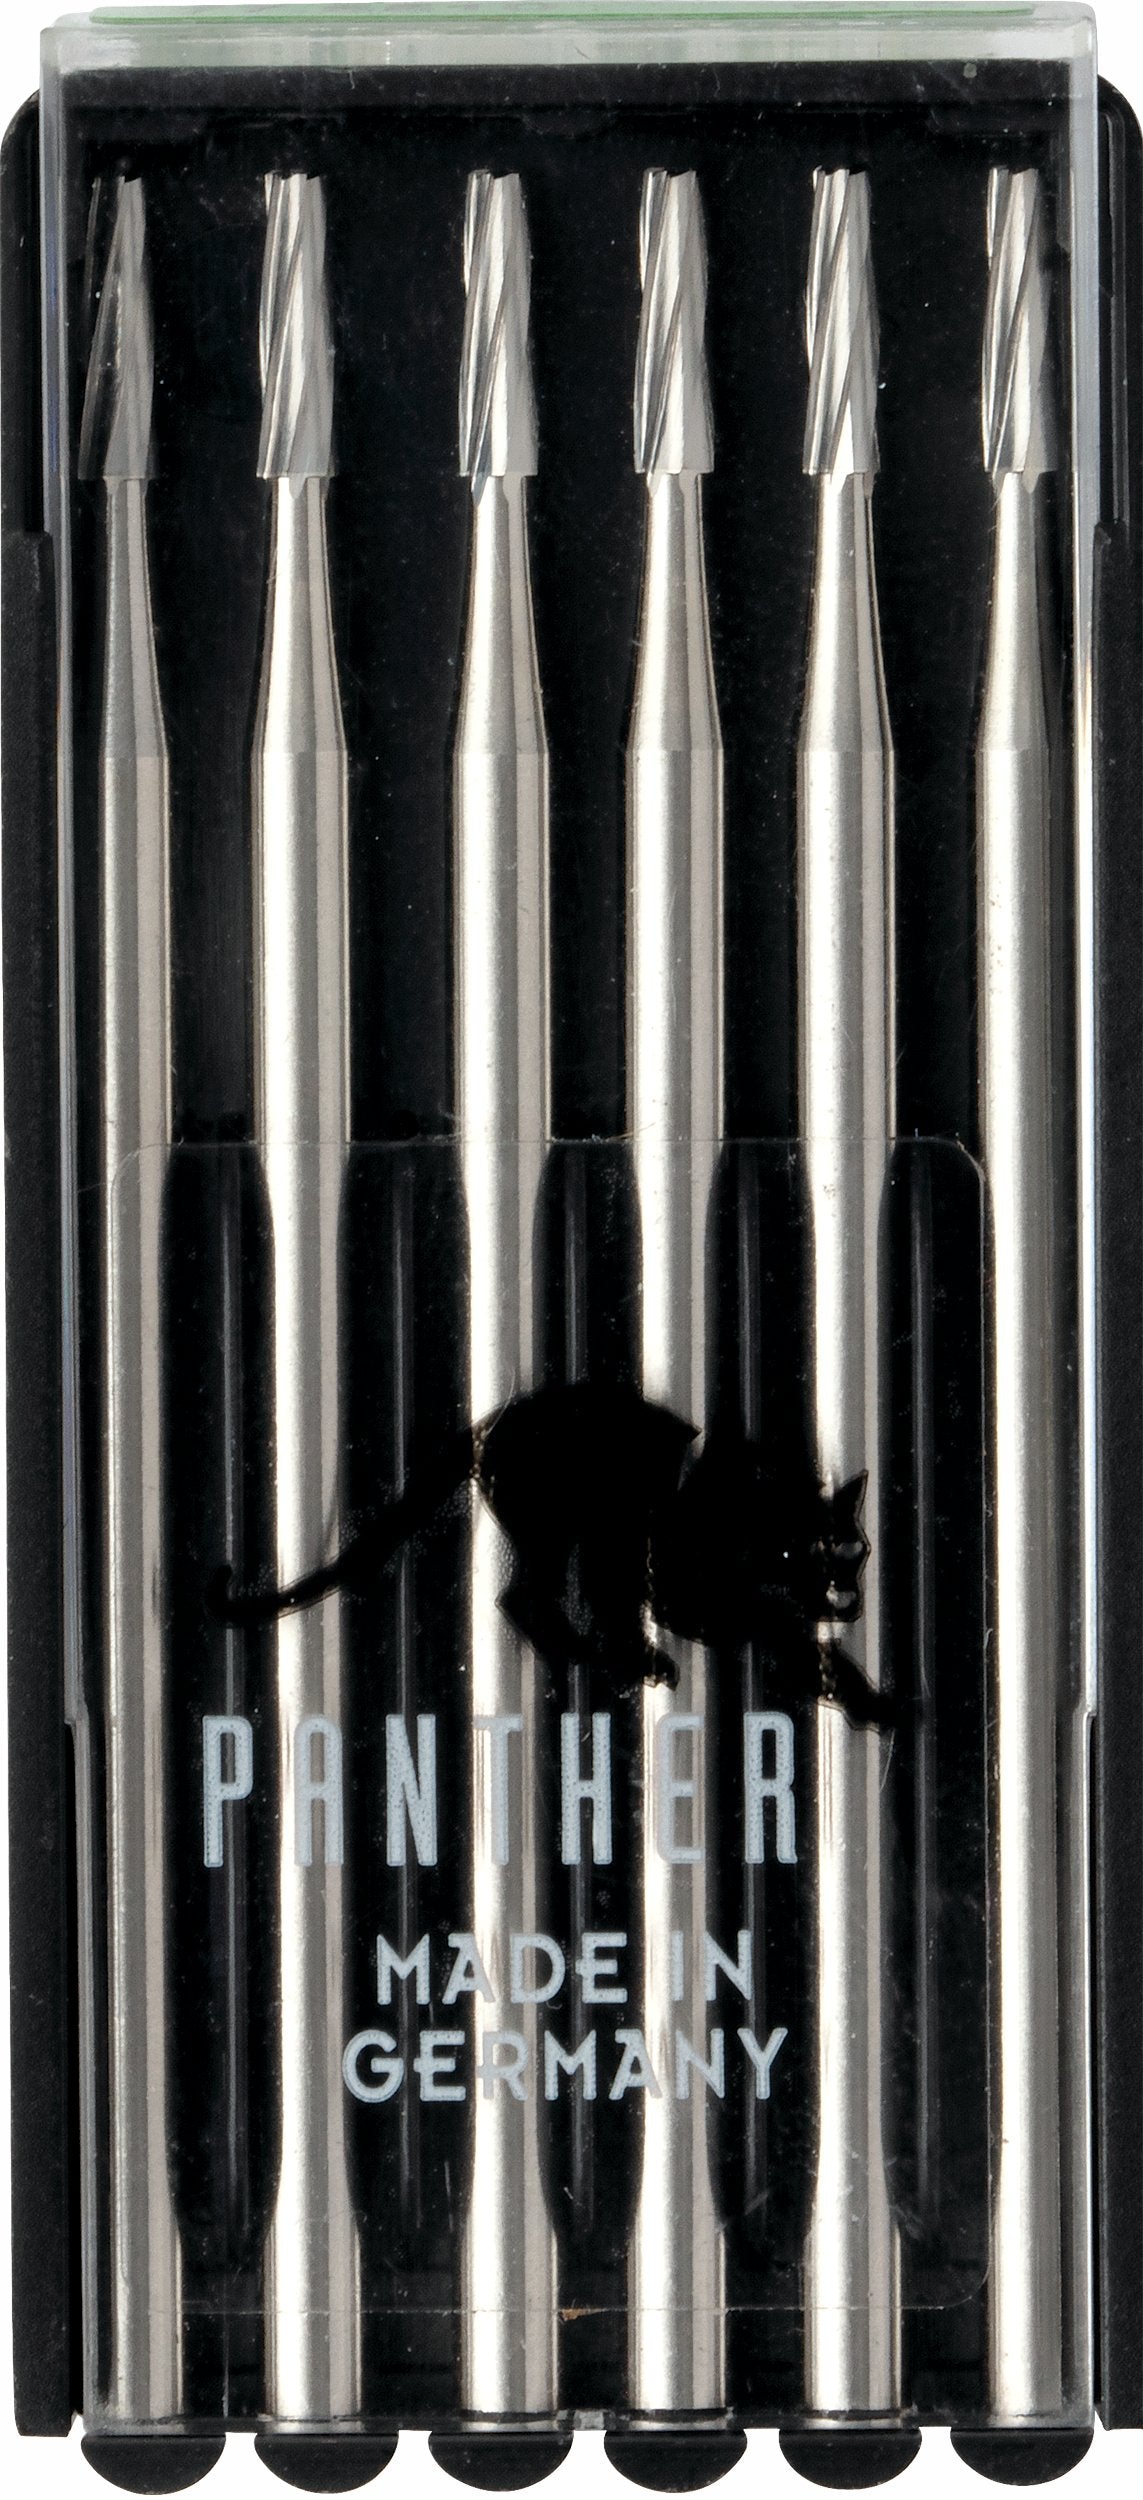 Panther® Tungsten Carbide Cone Square Burs